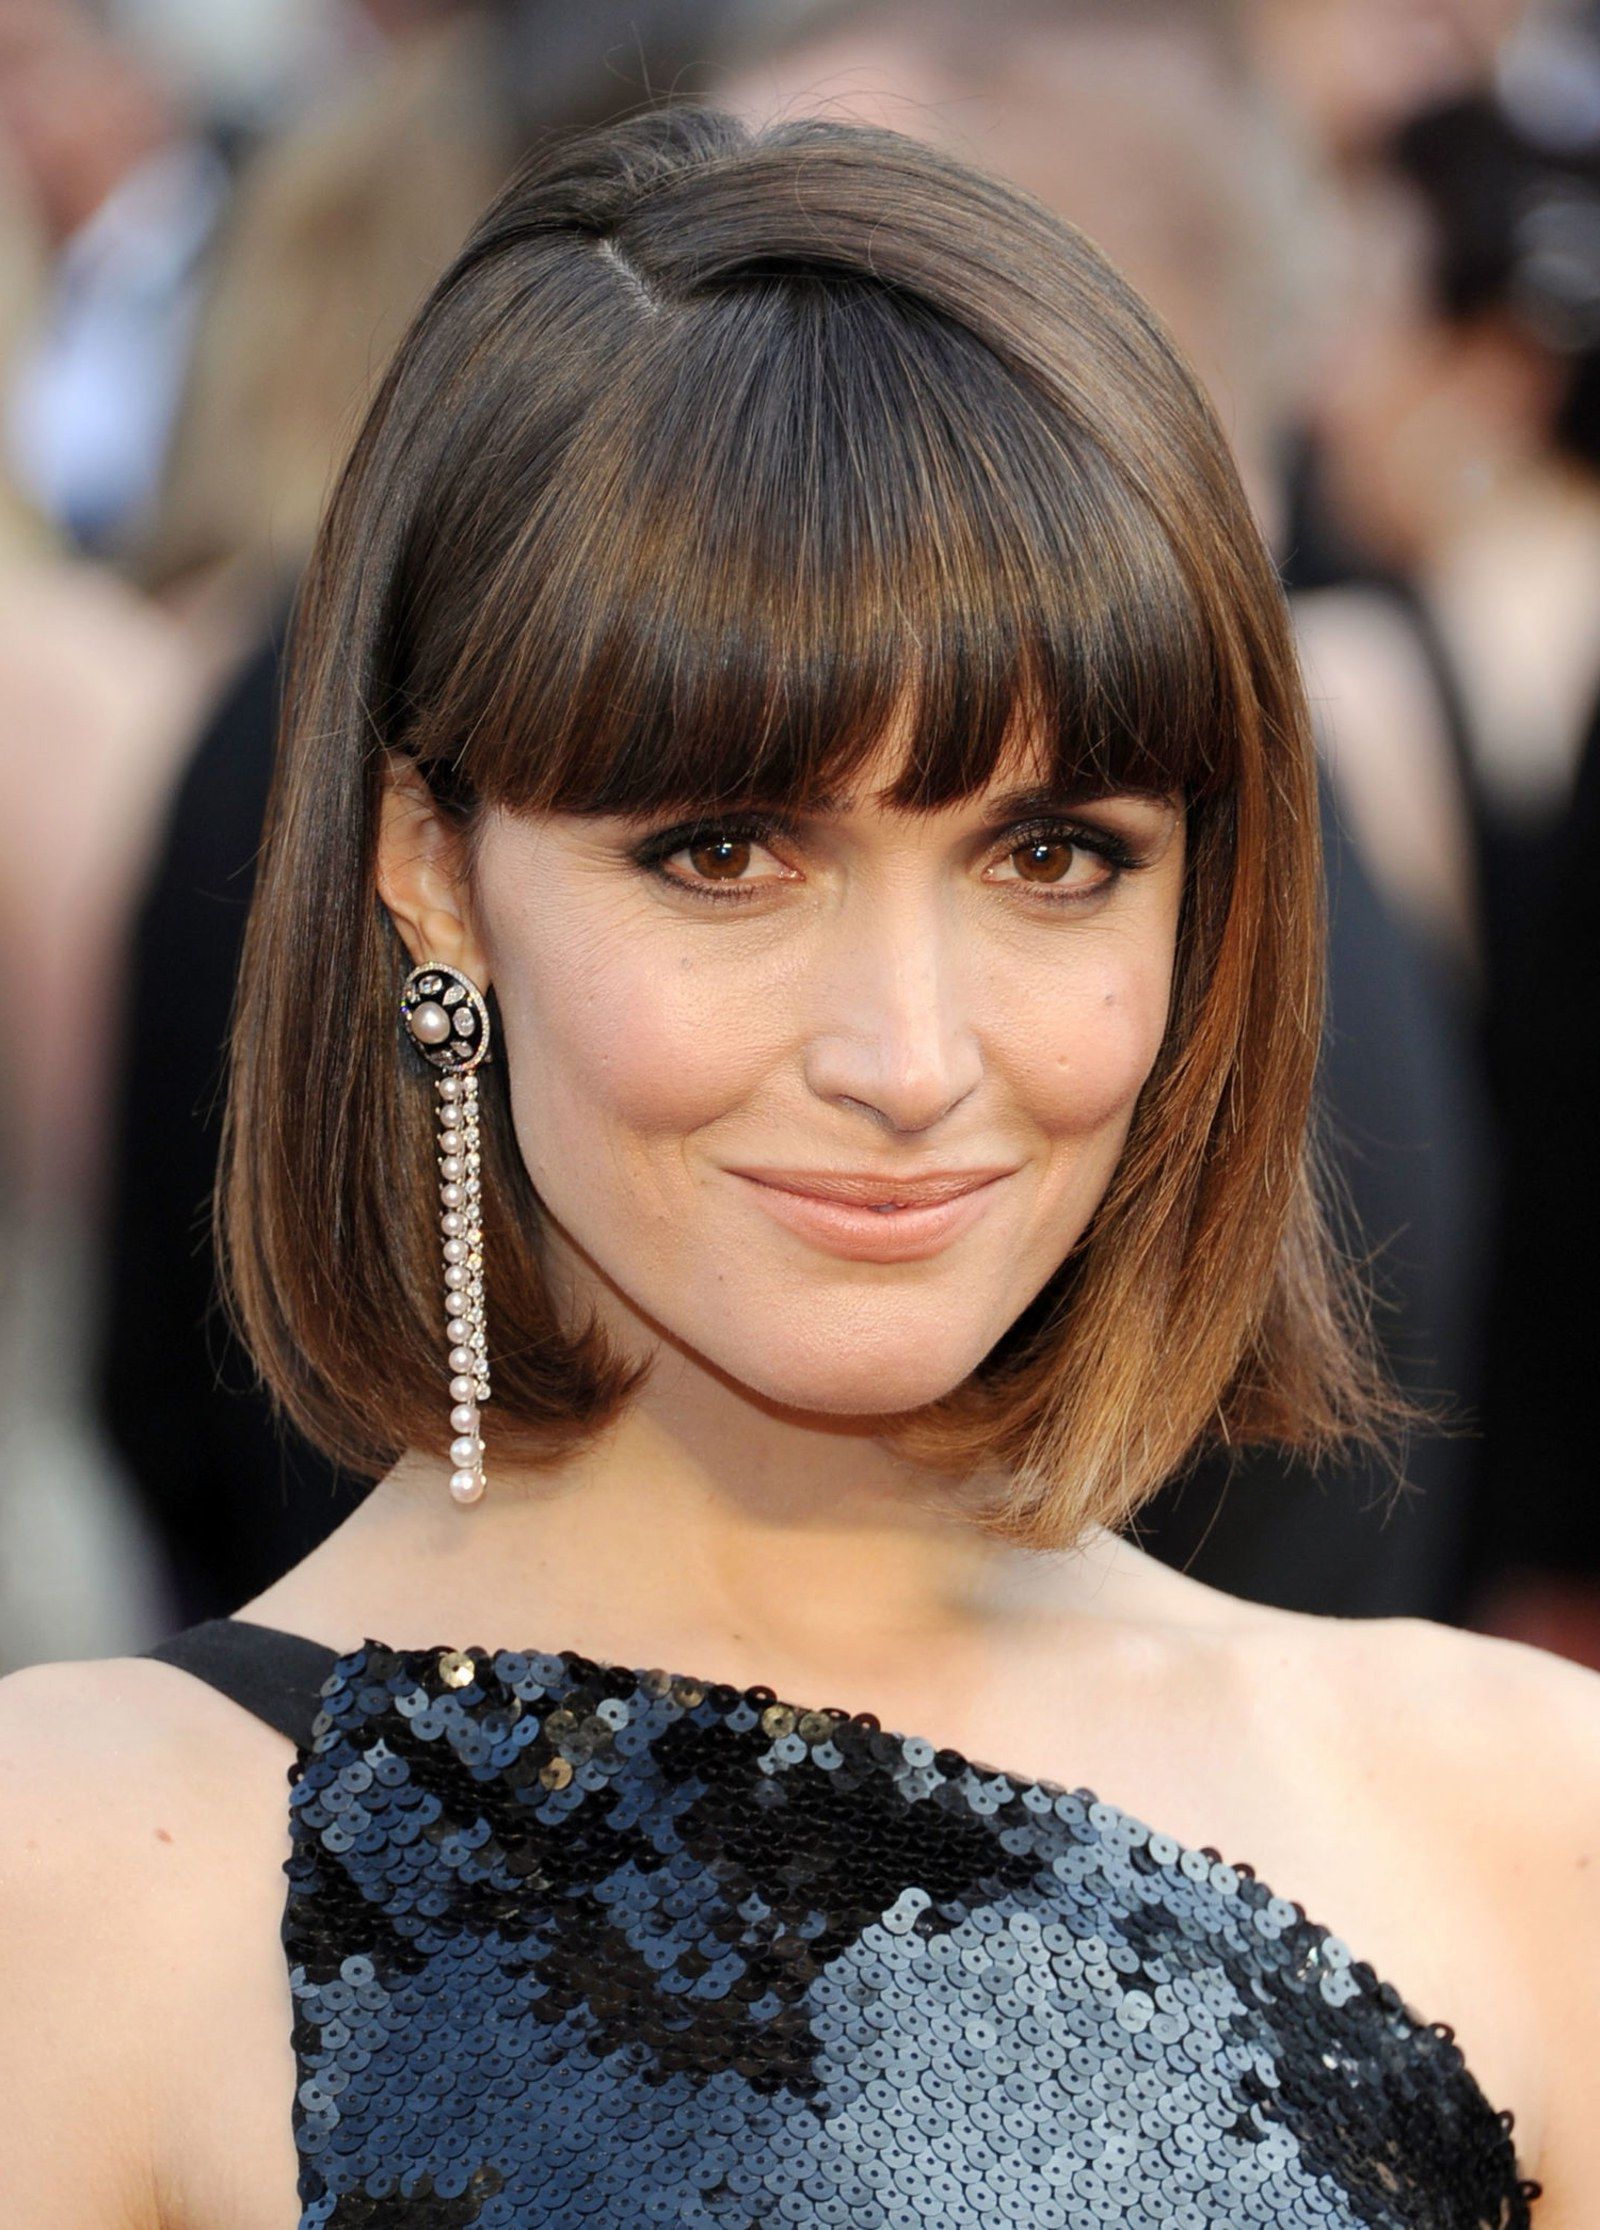 25 Of The Best Oscar Hairstyles Ever – Glamour In Short Hairstyles With Blunt Bangs (View 20 of 25)